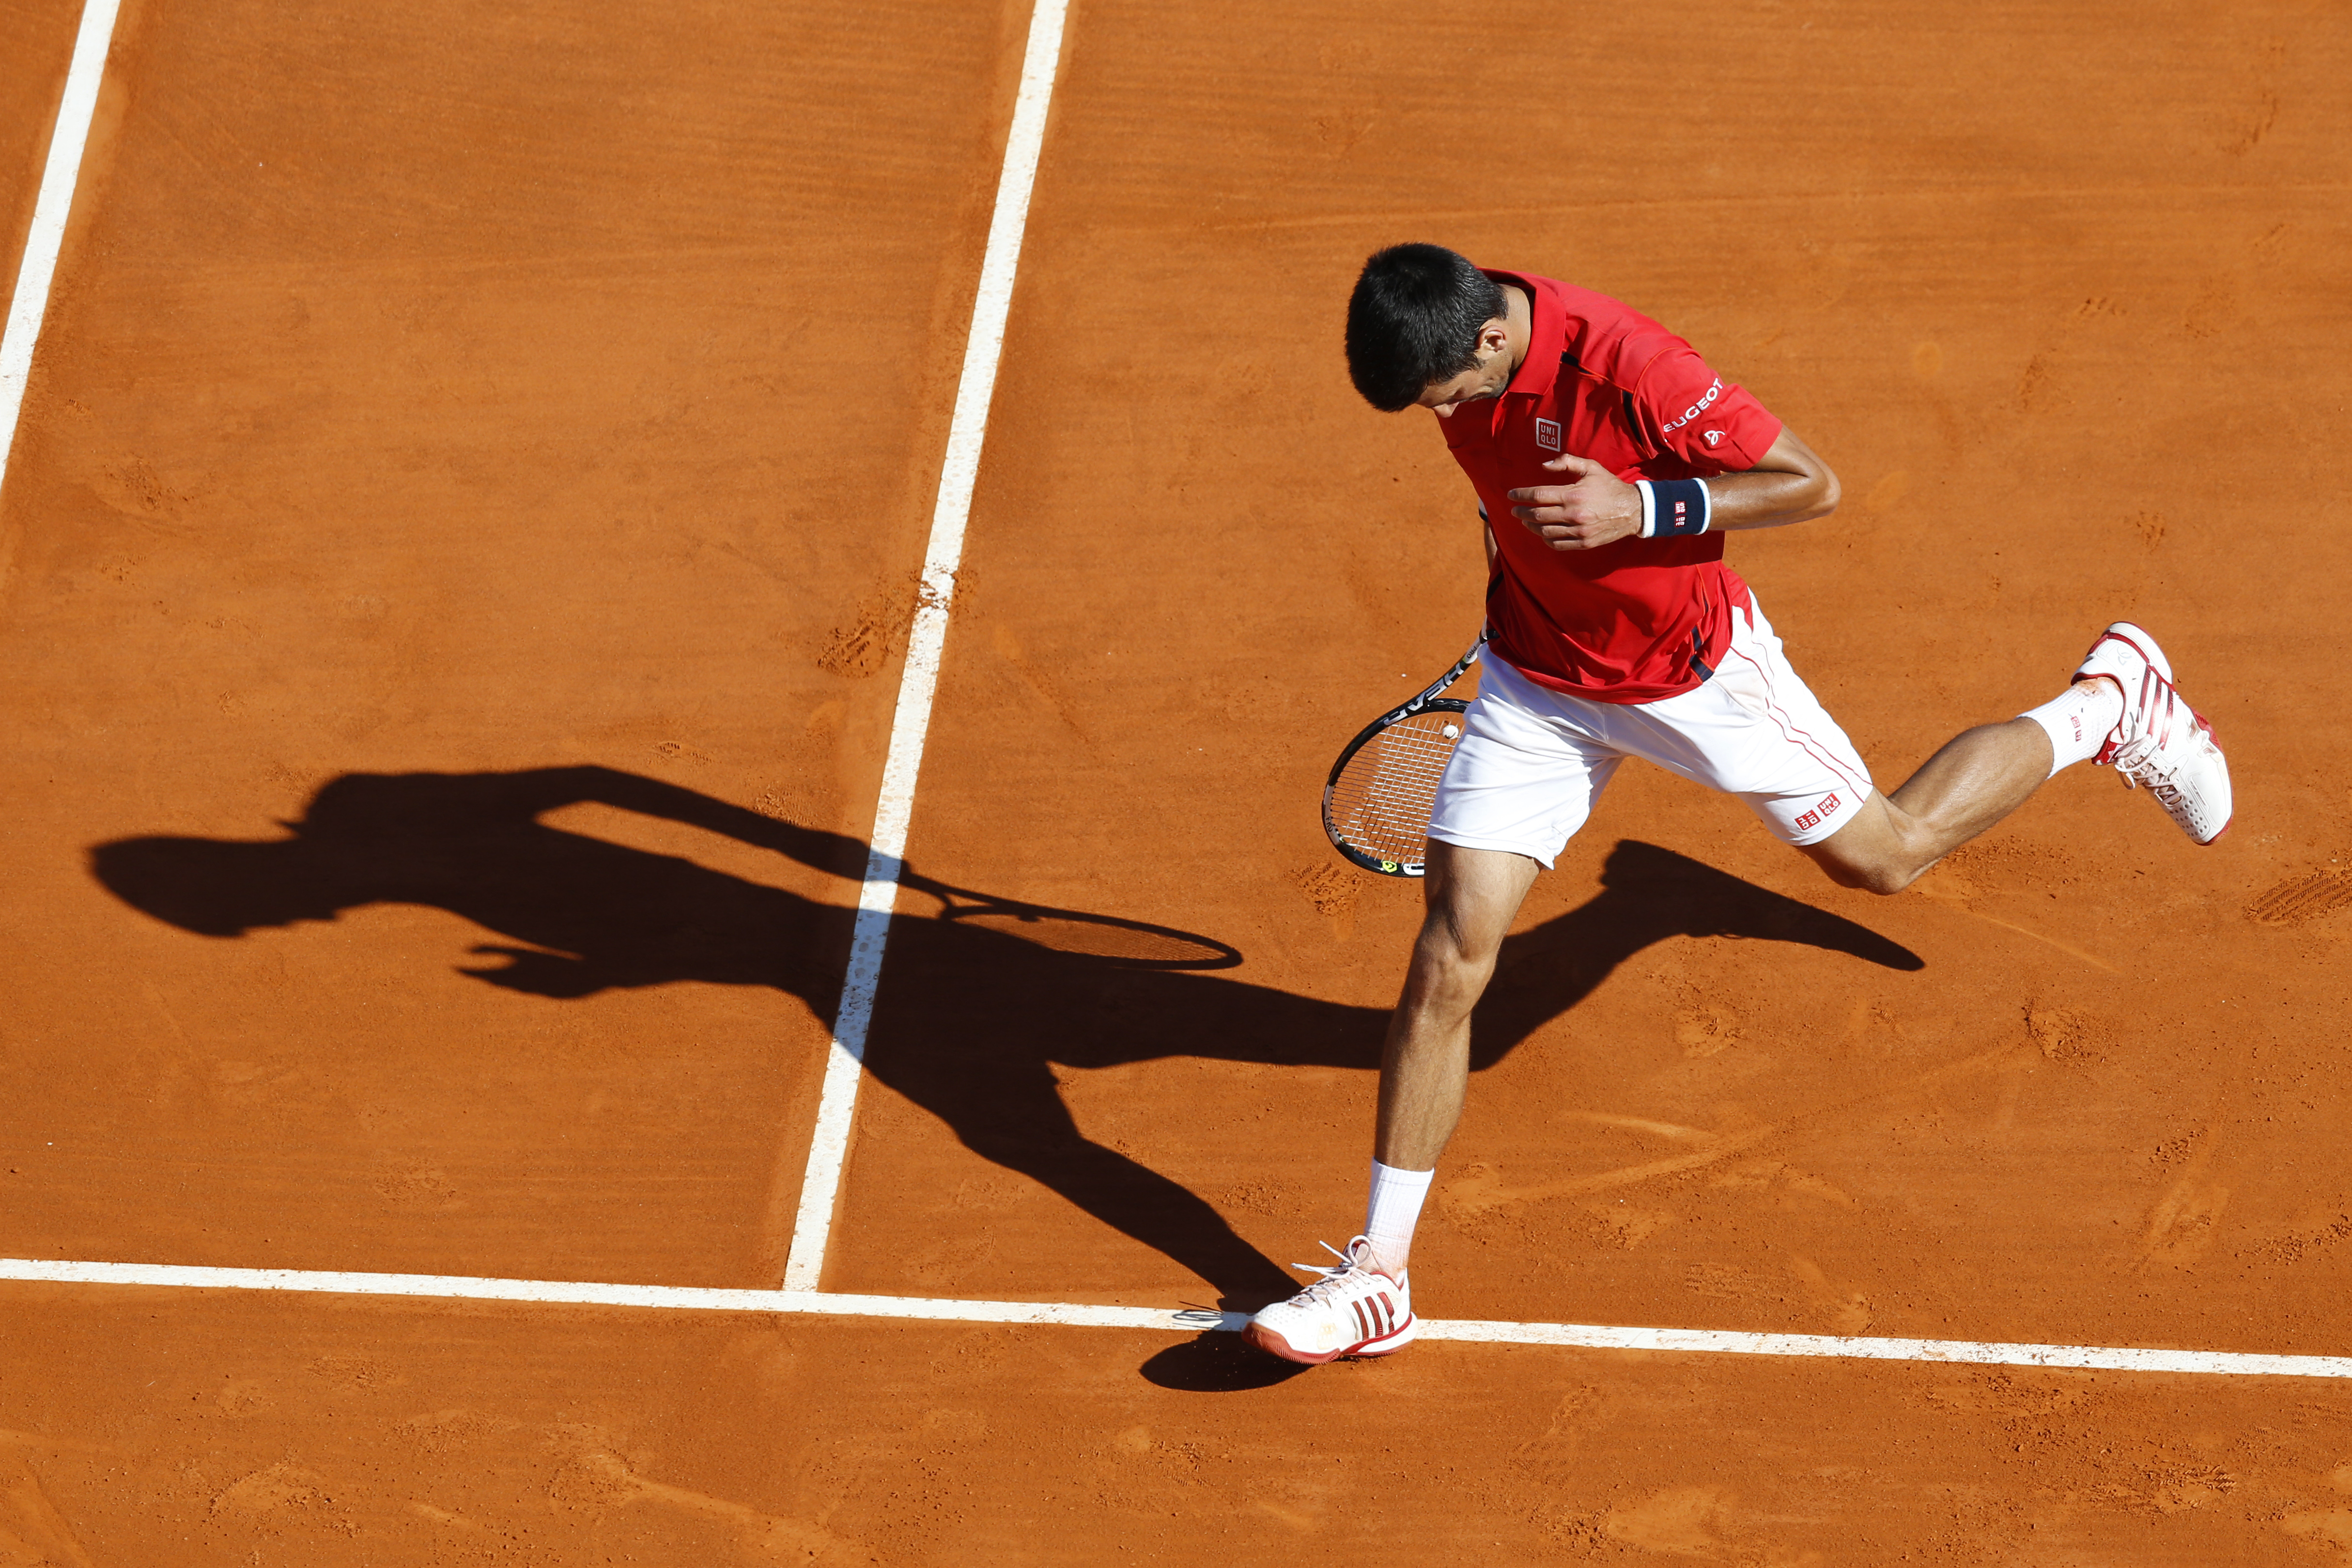 Serbia's Novak Djokovic runs during his tennis match against Czech Republic's Jiri Vesely at the Monte-Carlo ATP Masters Series tournament, on April 13, 2016 in Monaco.  AFP PHOTO / VALERY HACHE / AFP PHOTO / VALERY HACHE